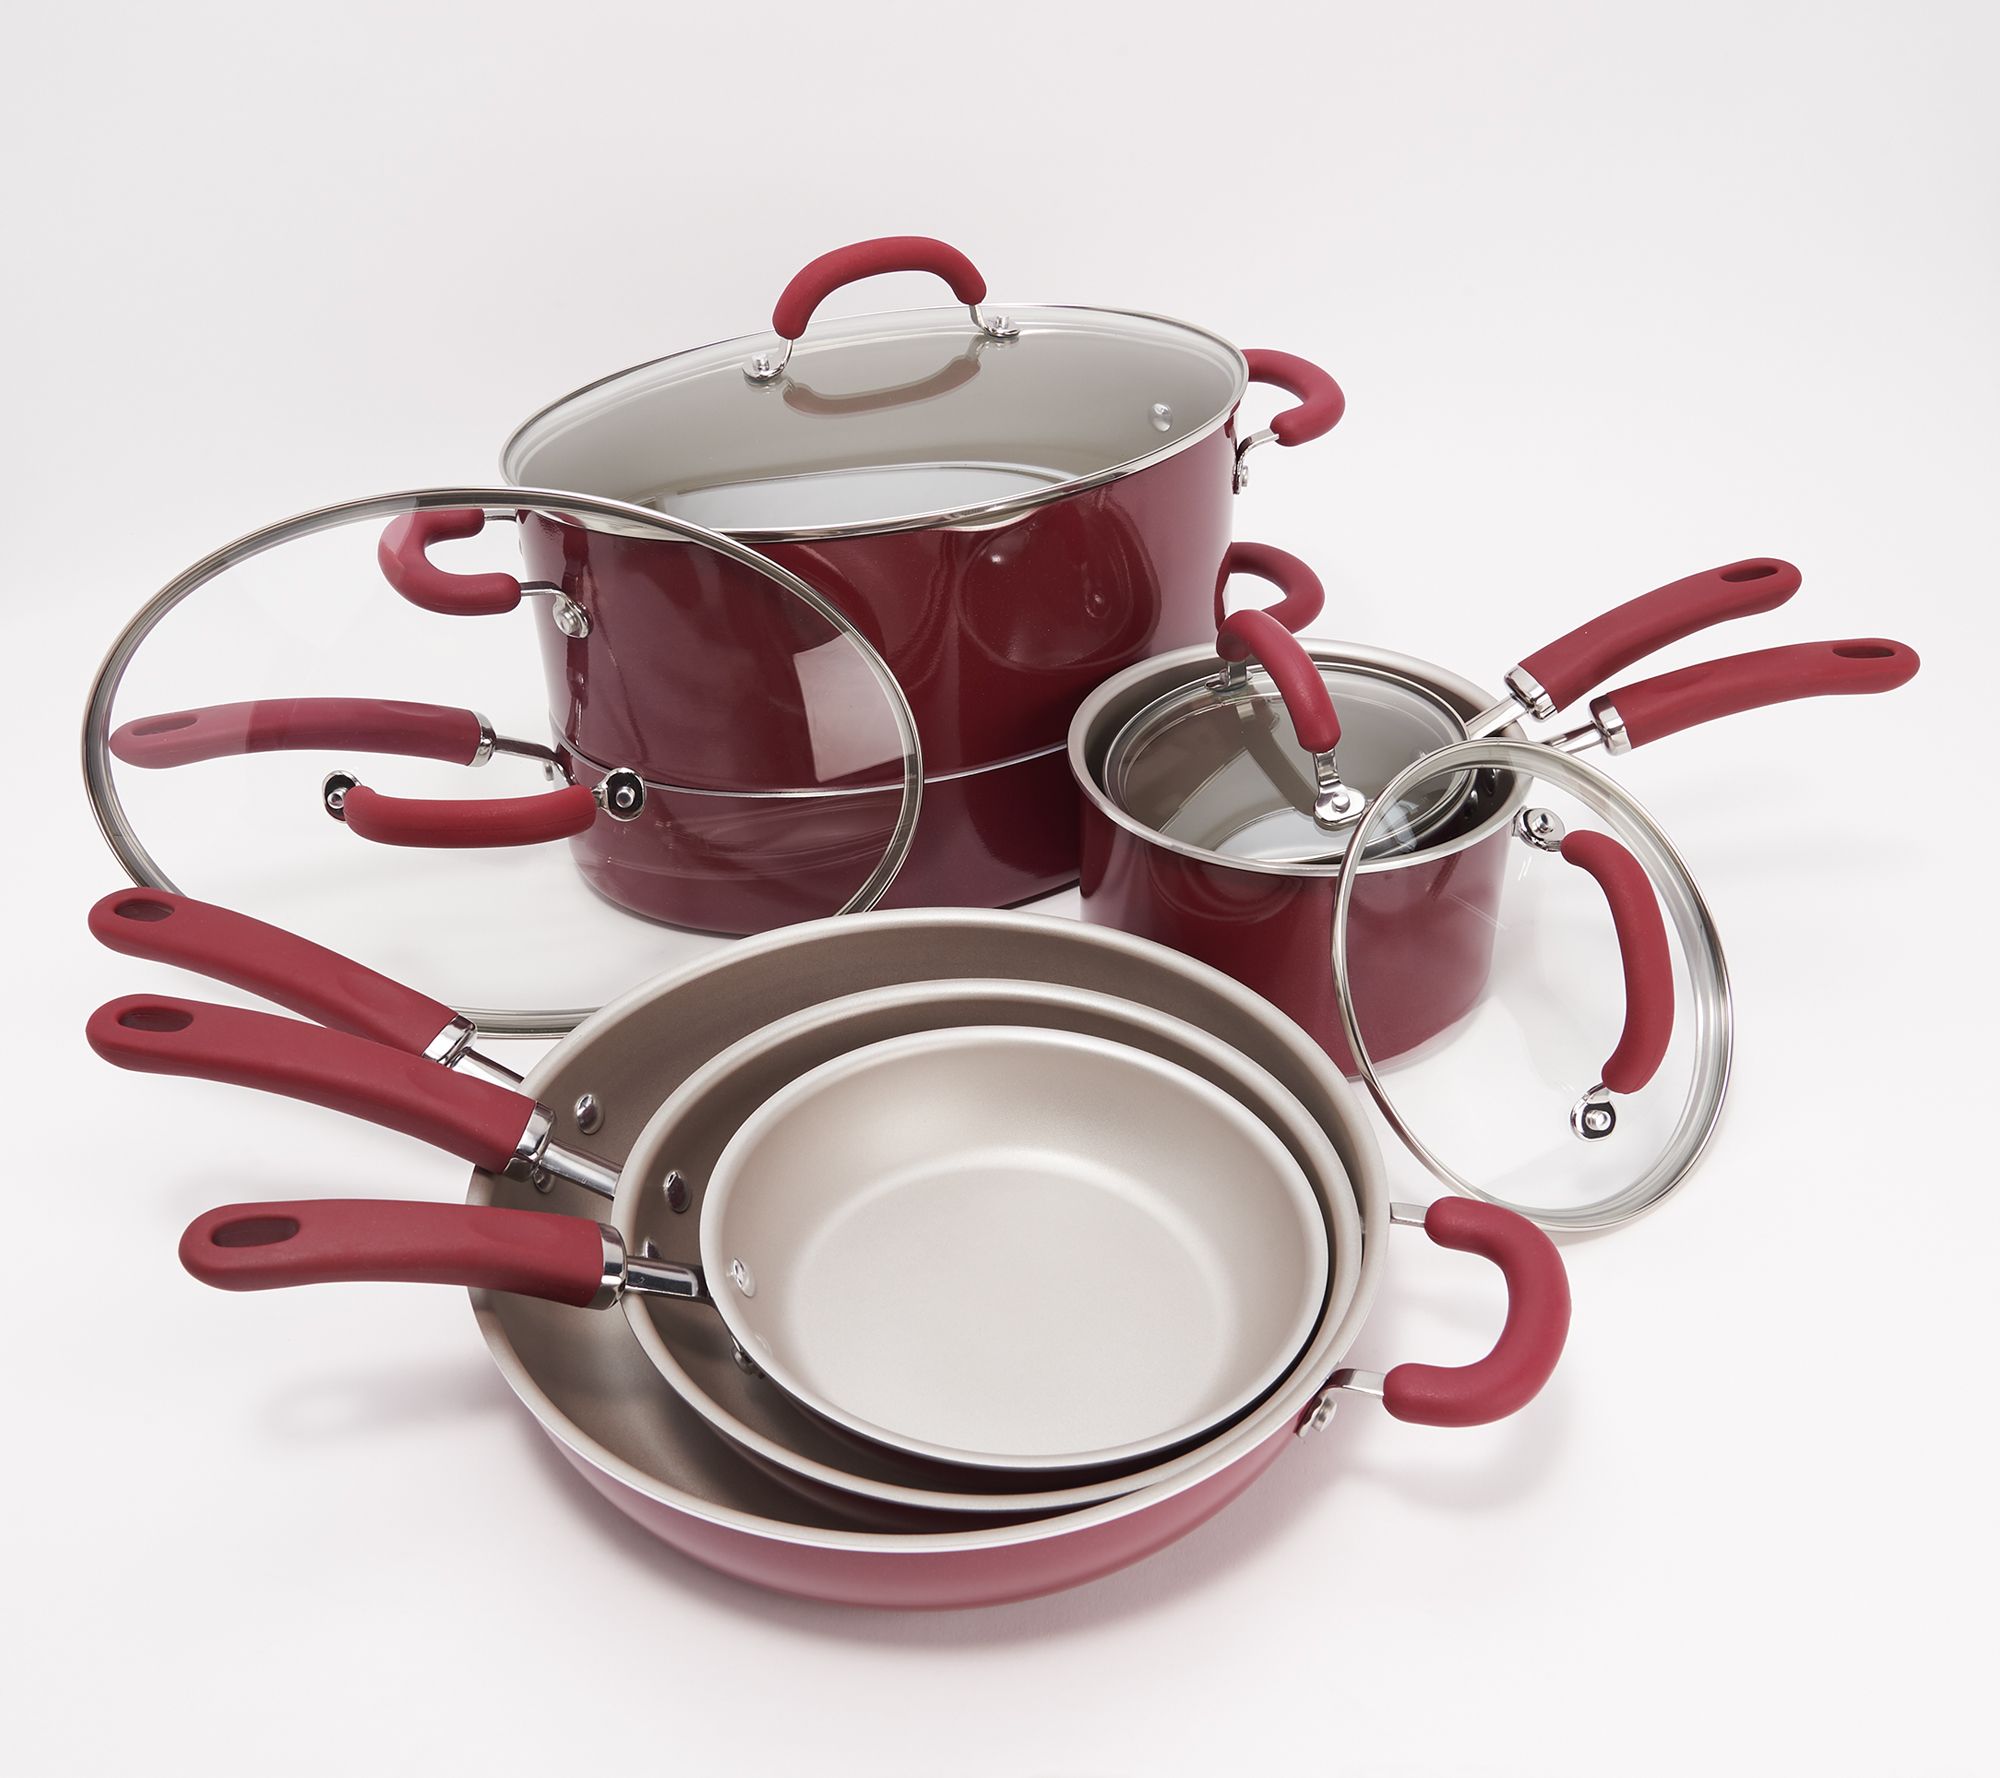 Rachael Ray Create Delicious 10-Piece Cookware Set in Stainless